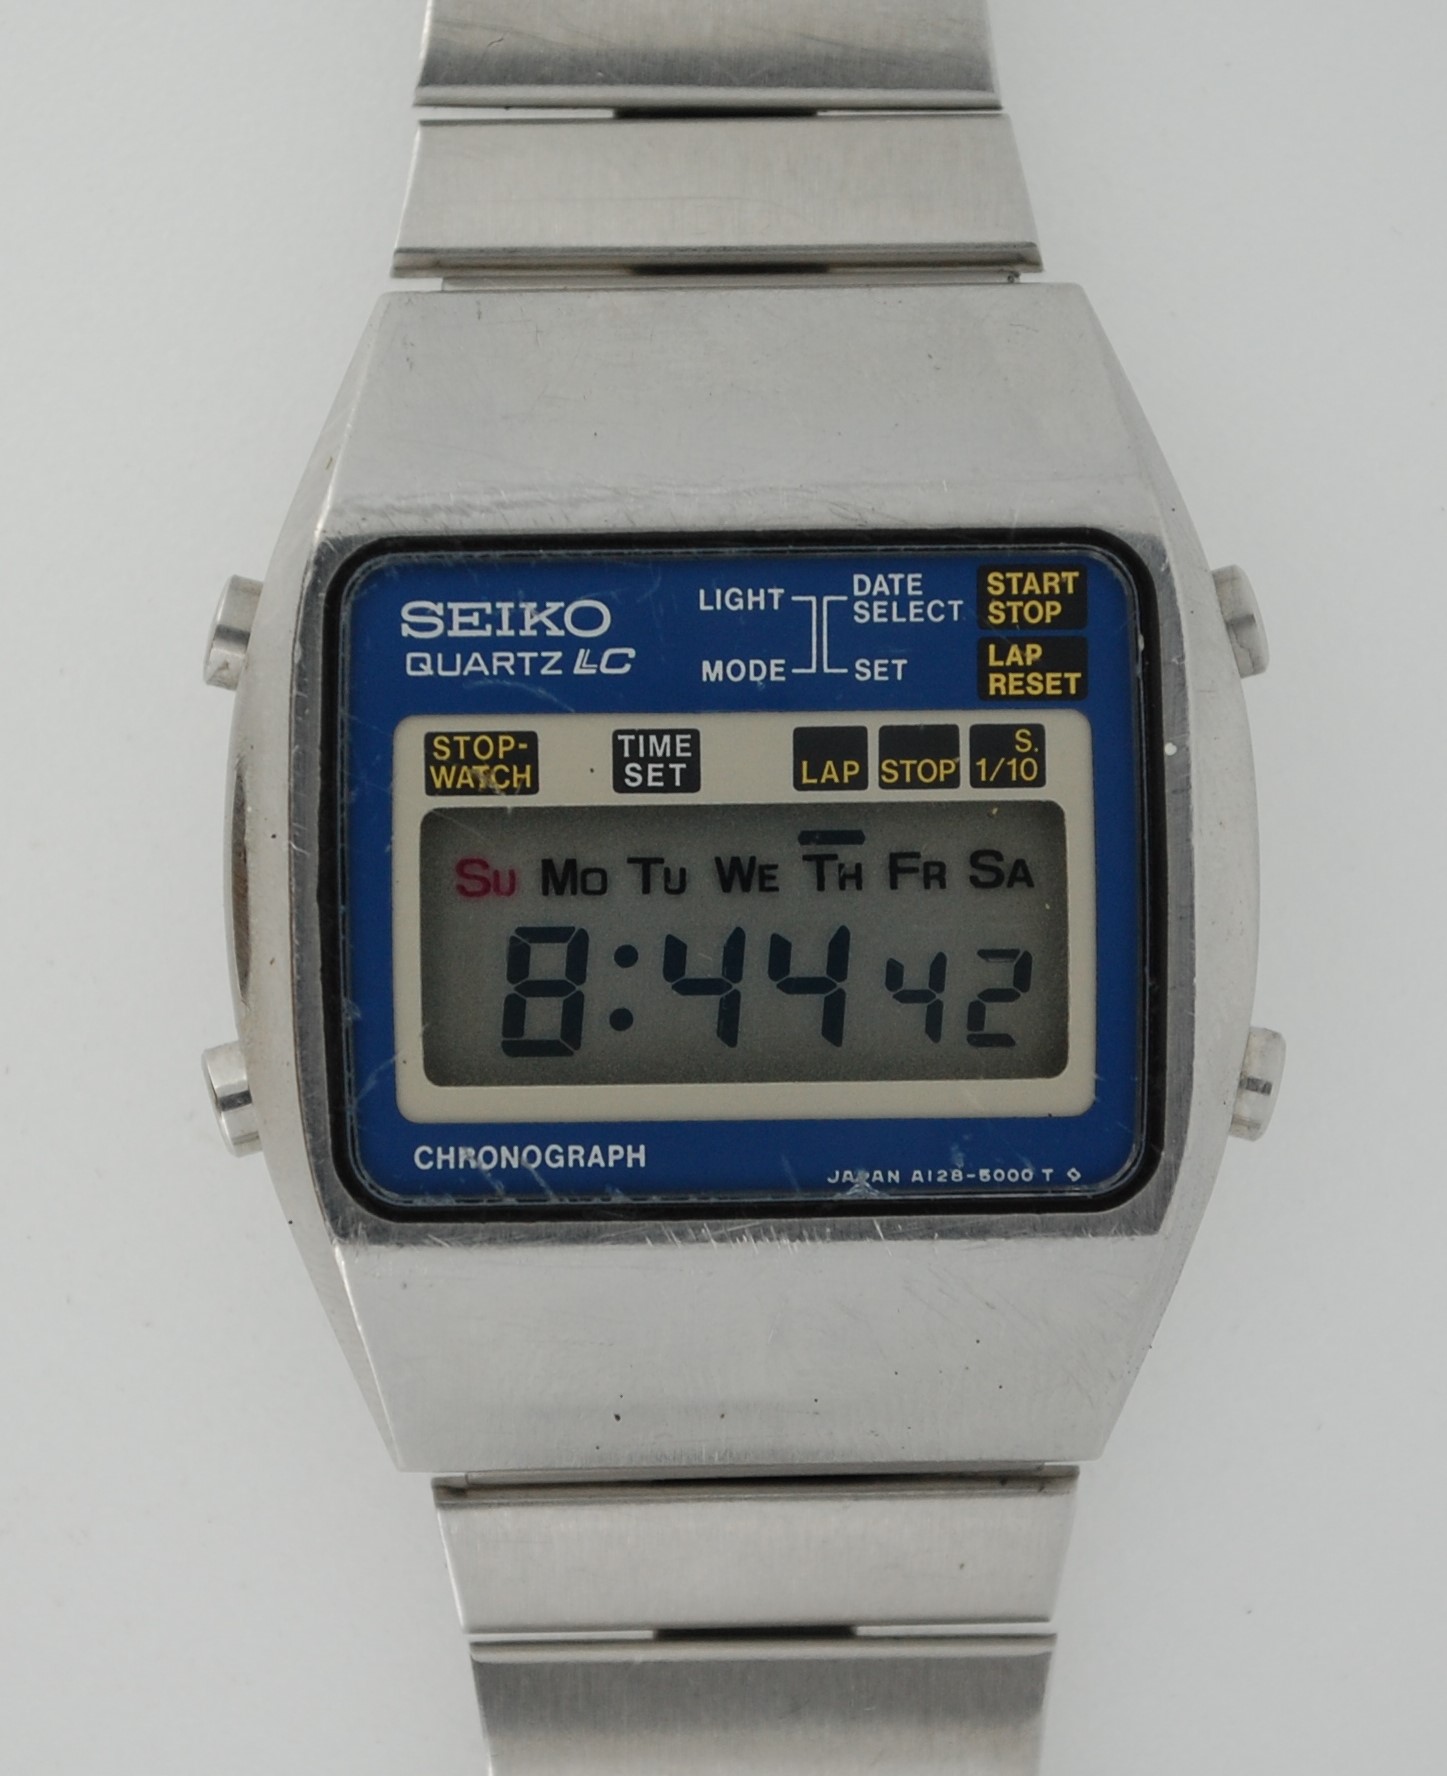 1978 Seiko LCD Chronograph A128-5000 with box - Birth Year Watches